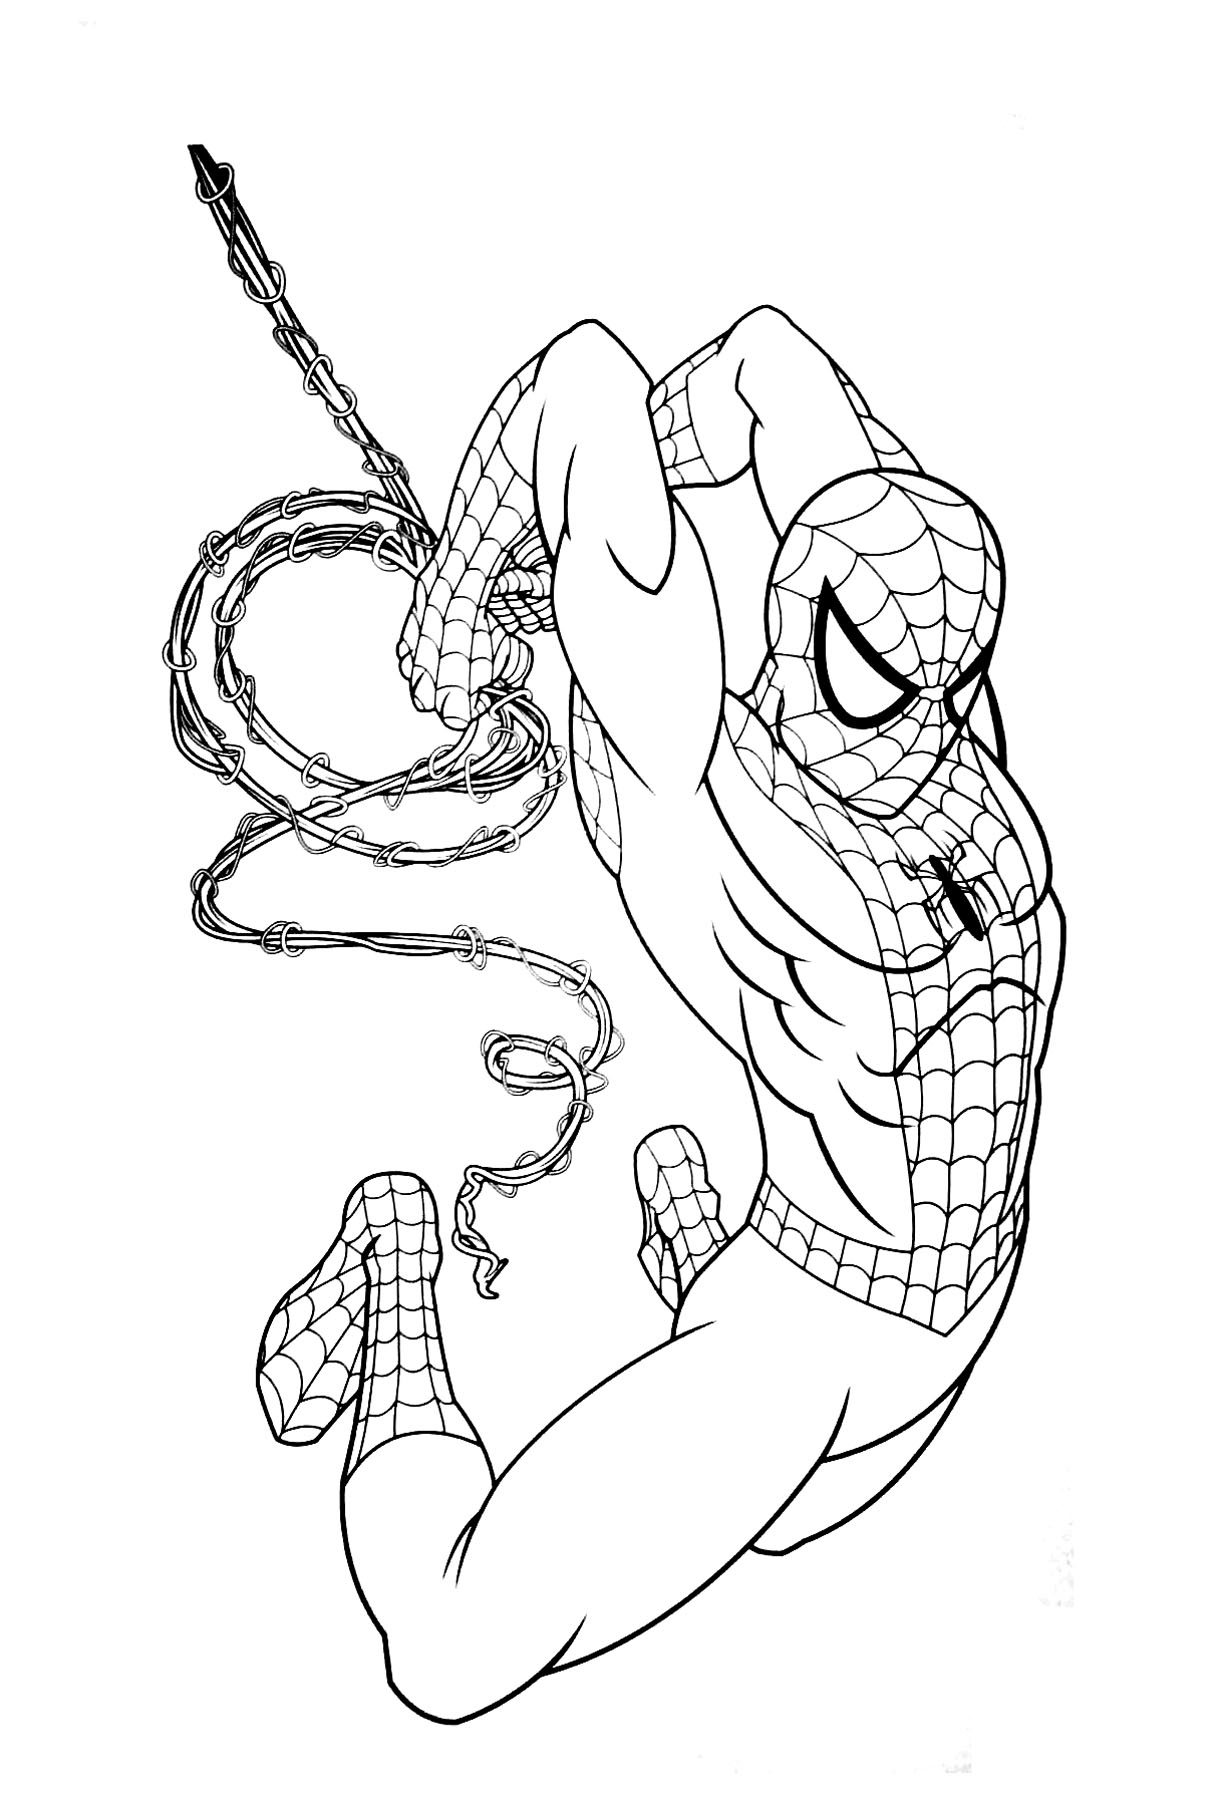 Spiderman free to color for children - Spiderman Kids Coloring Pages